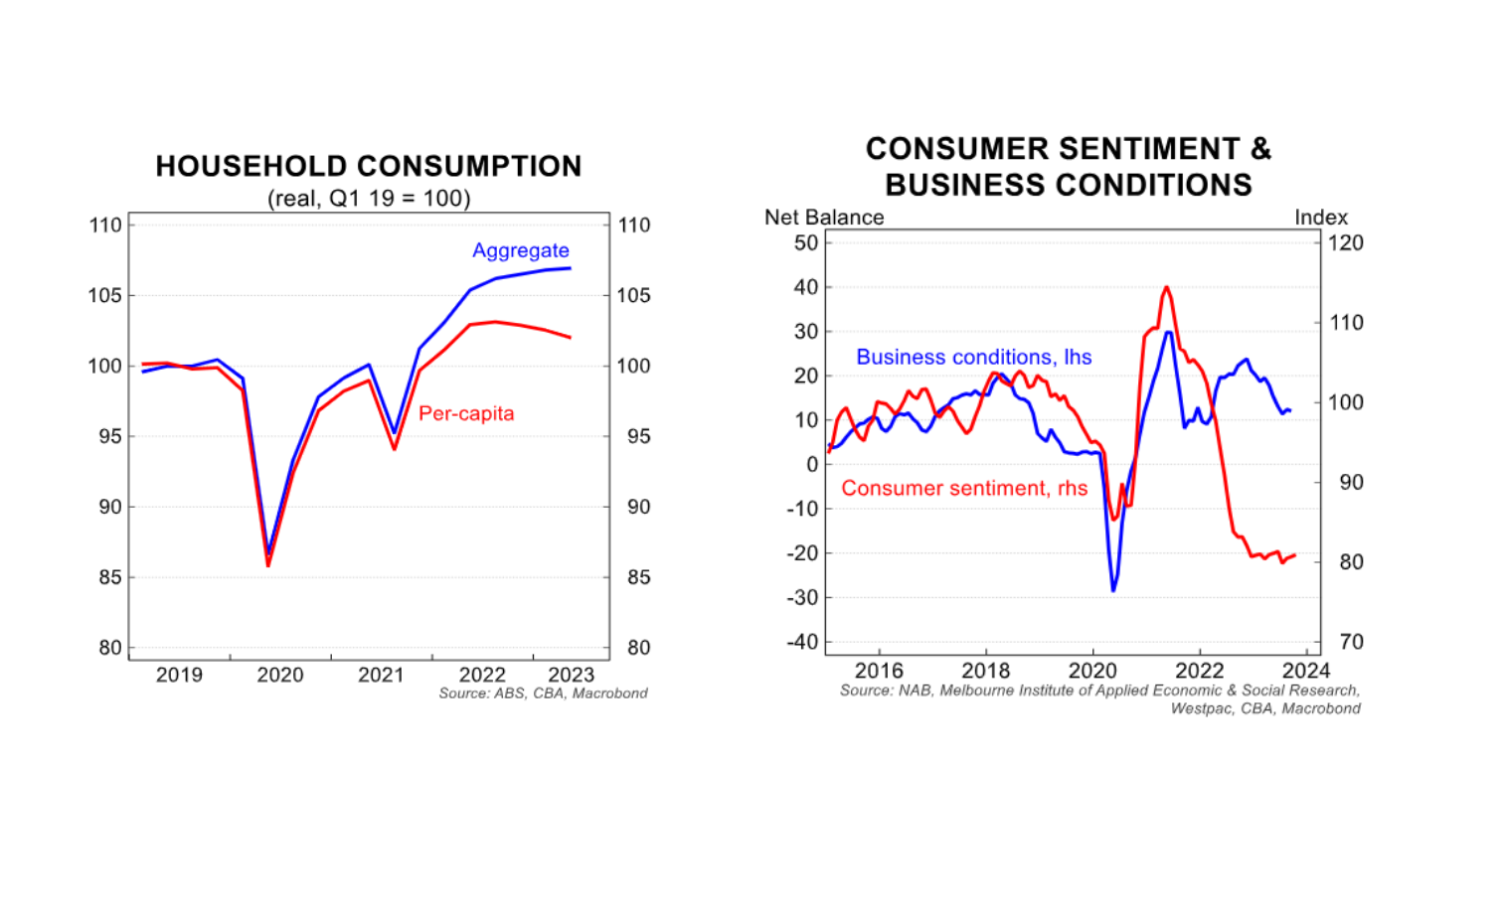 Aggregate demand is what matters for business, per capita spending better reflects individual living standards